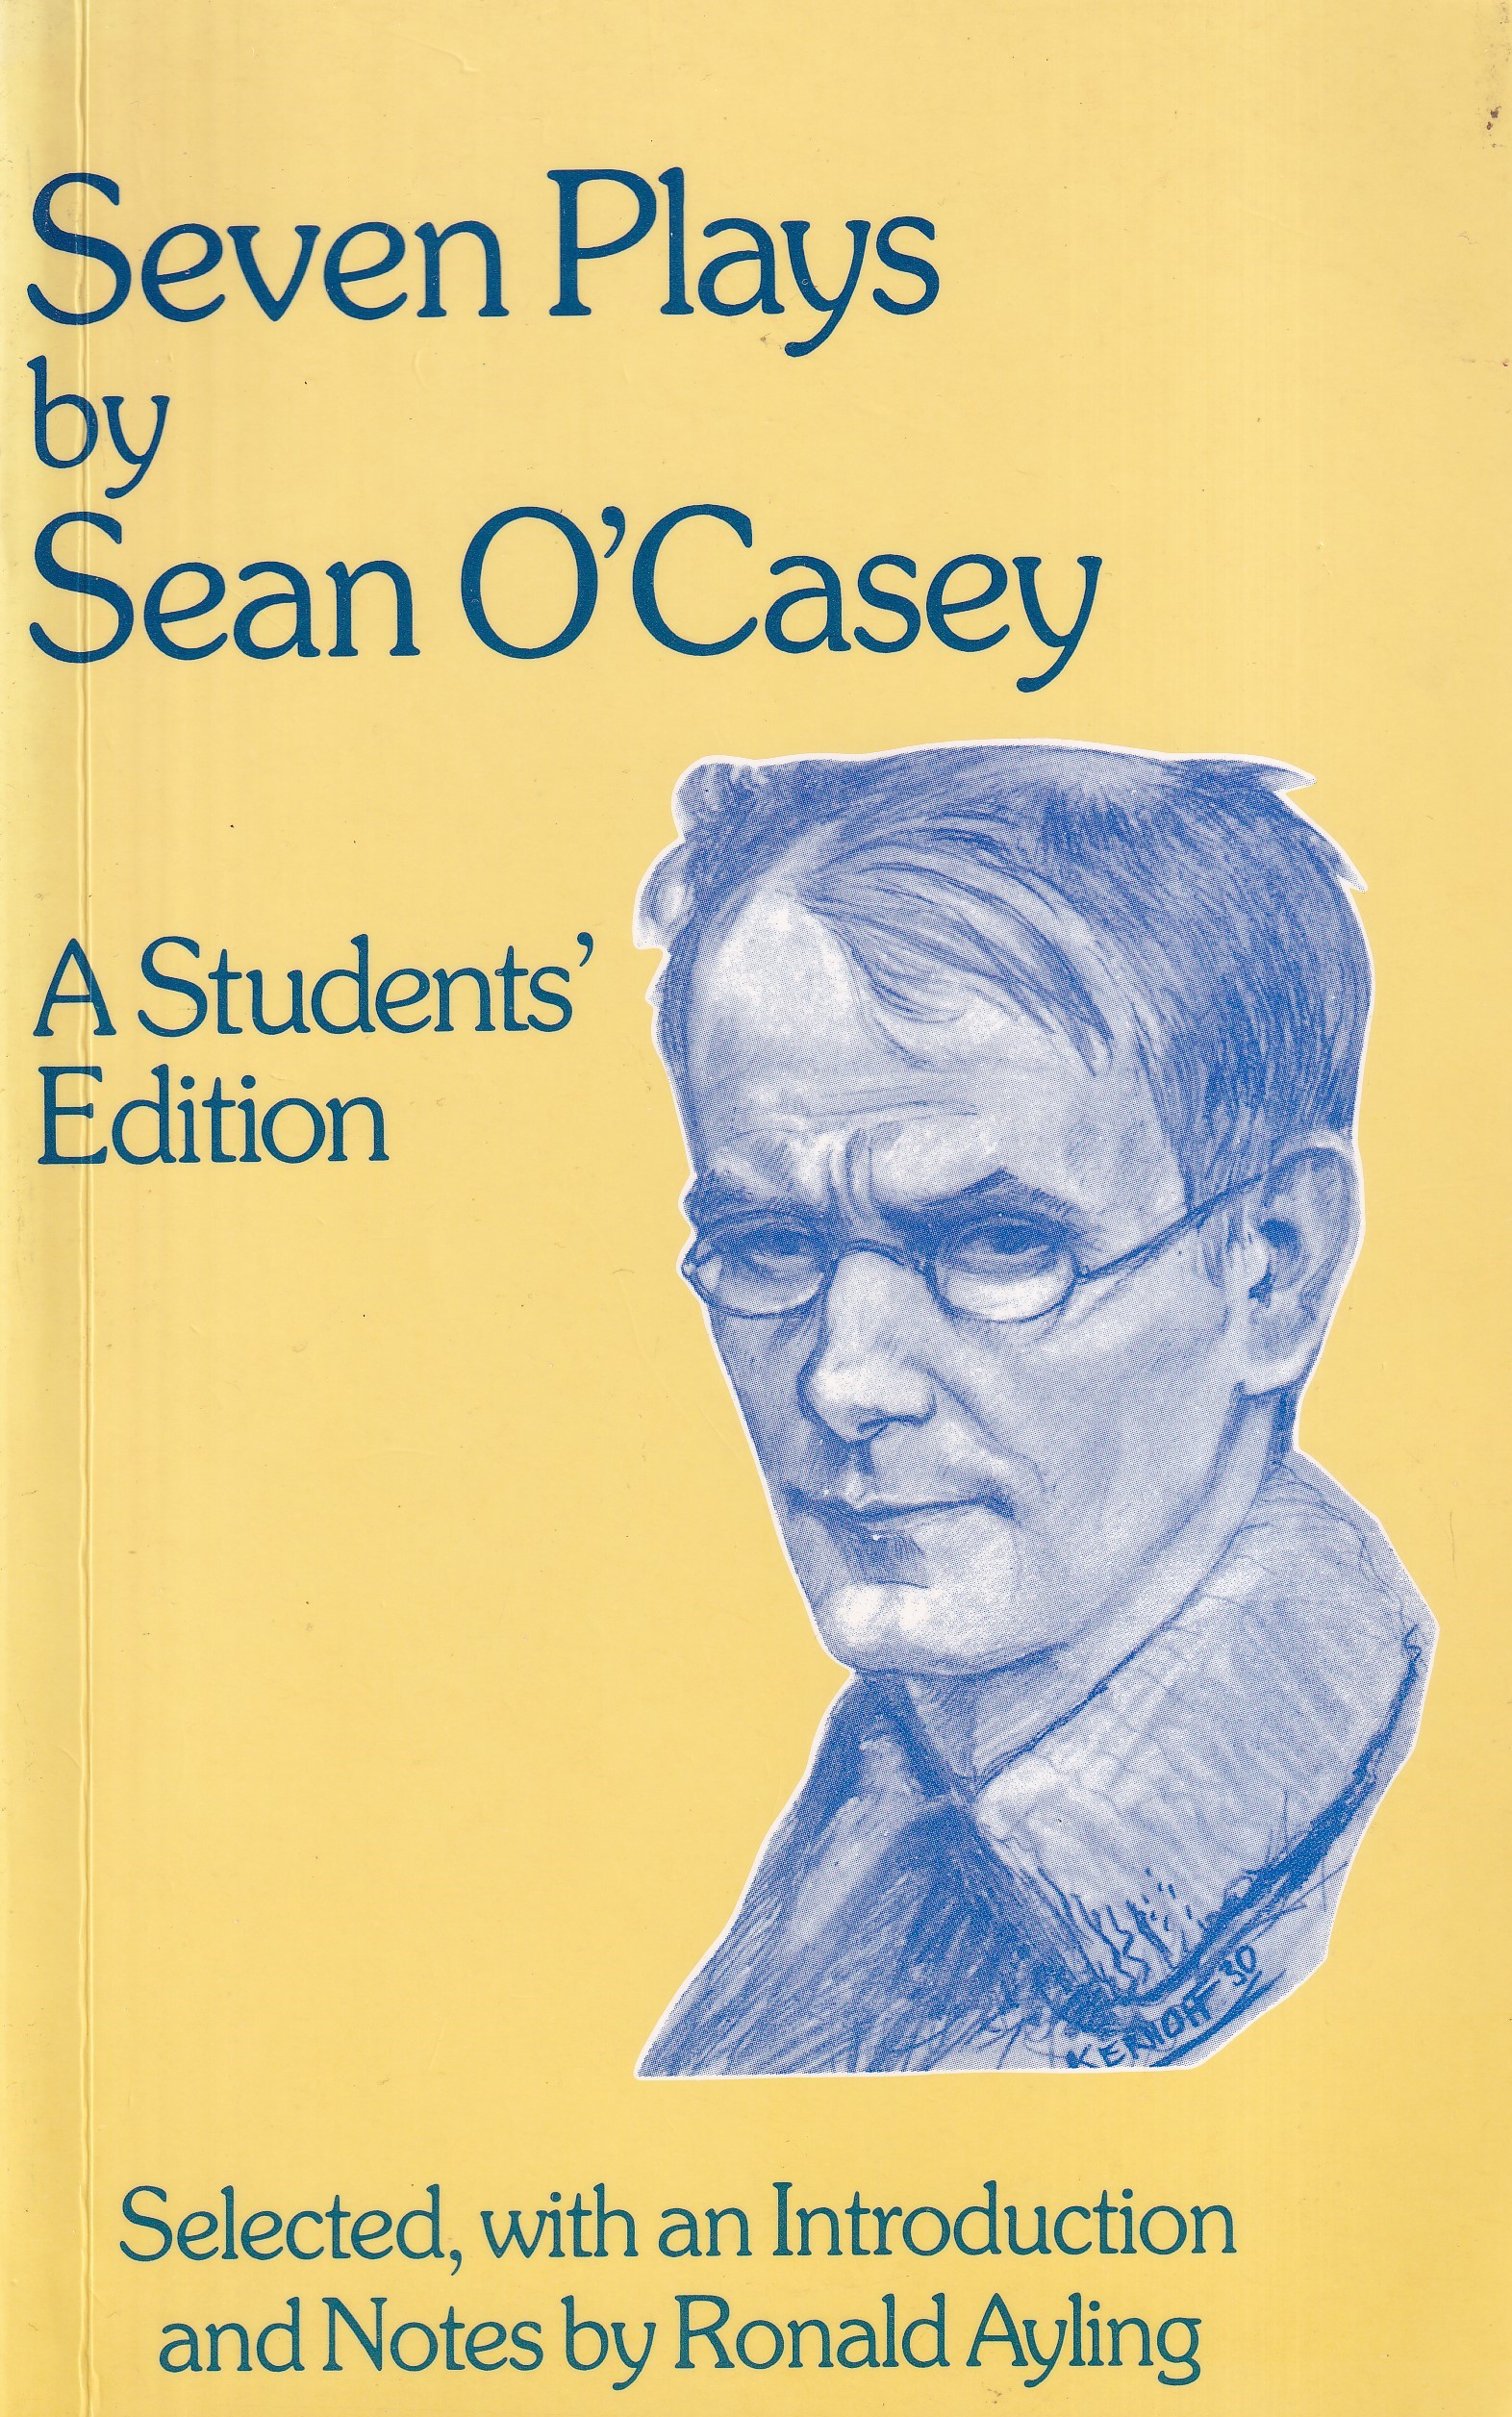 Seven Plays by Sean O’Casey: A Students’ Edition | Sean O'Casey | Charlie Byrne's